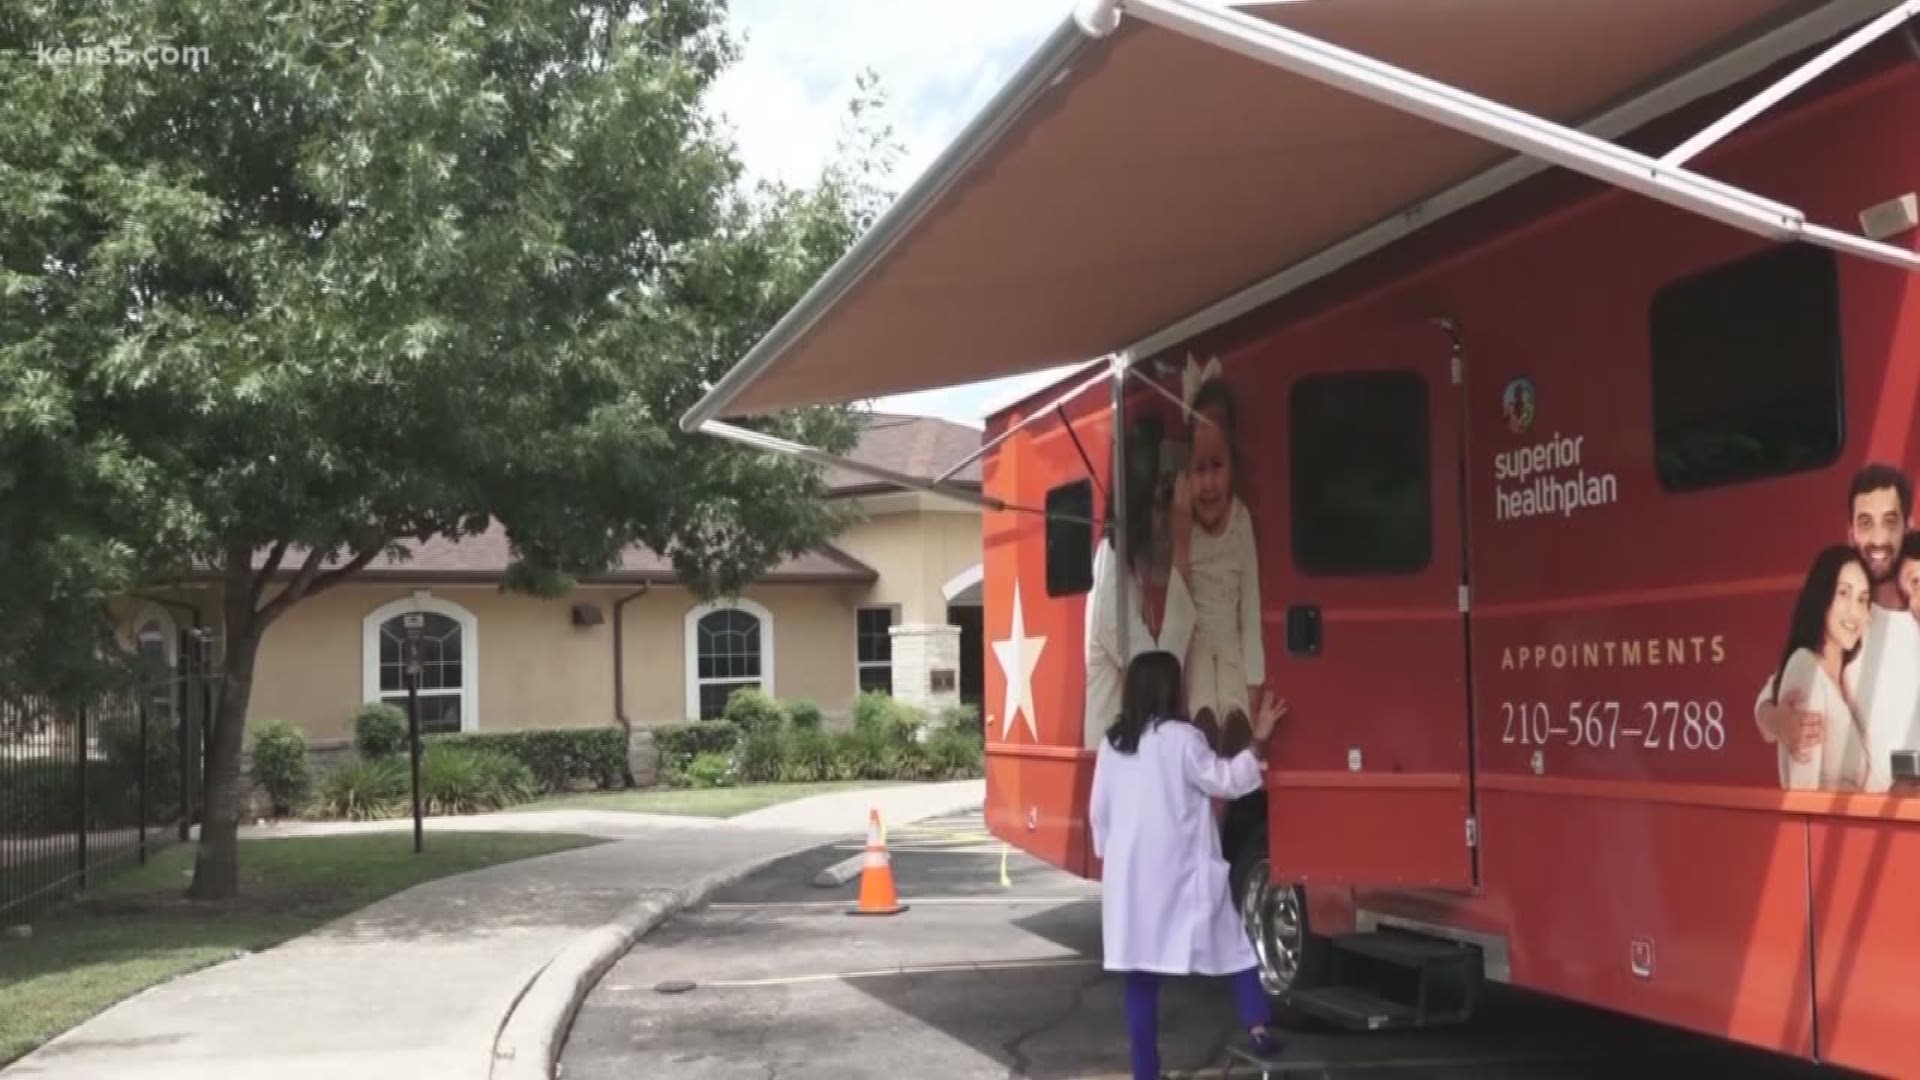 The UT Health School of Nursing's new Mobile Health Unit brings healthcare straight to the community.